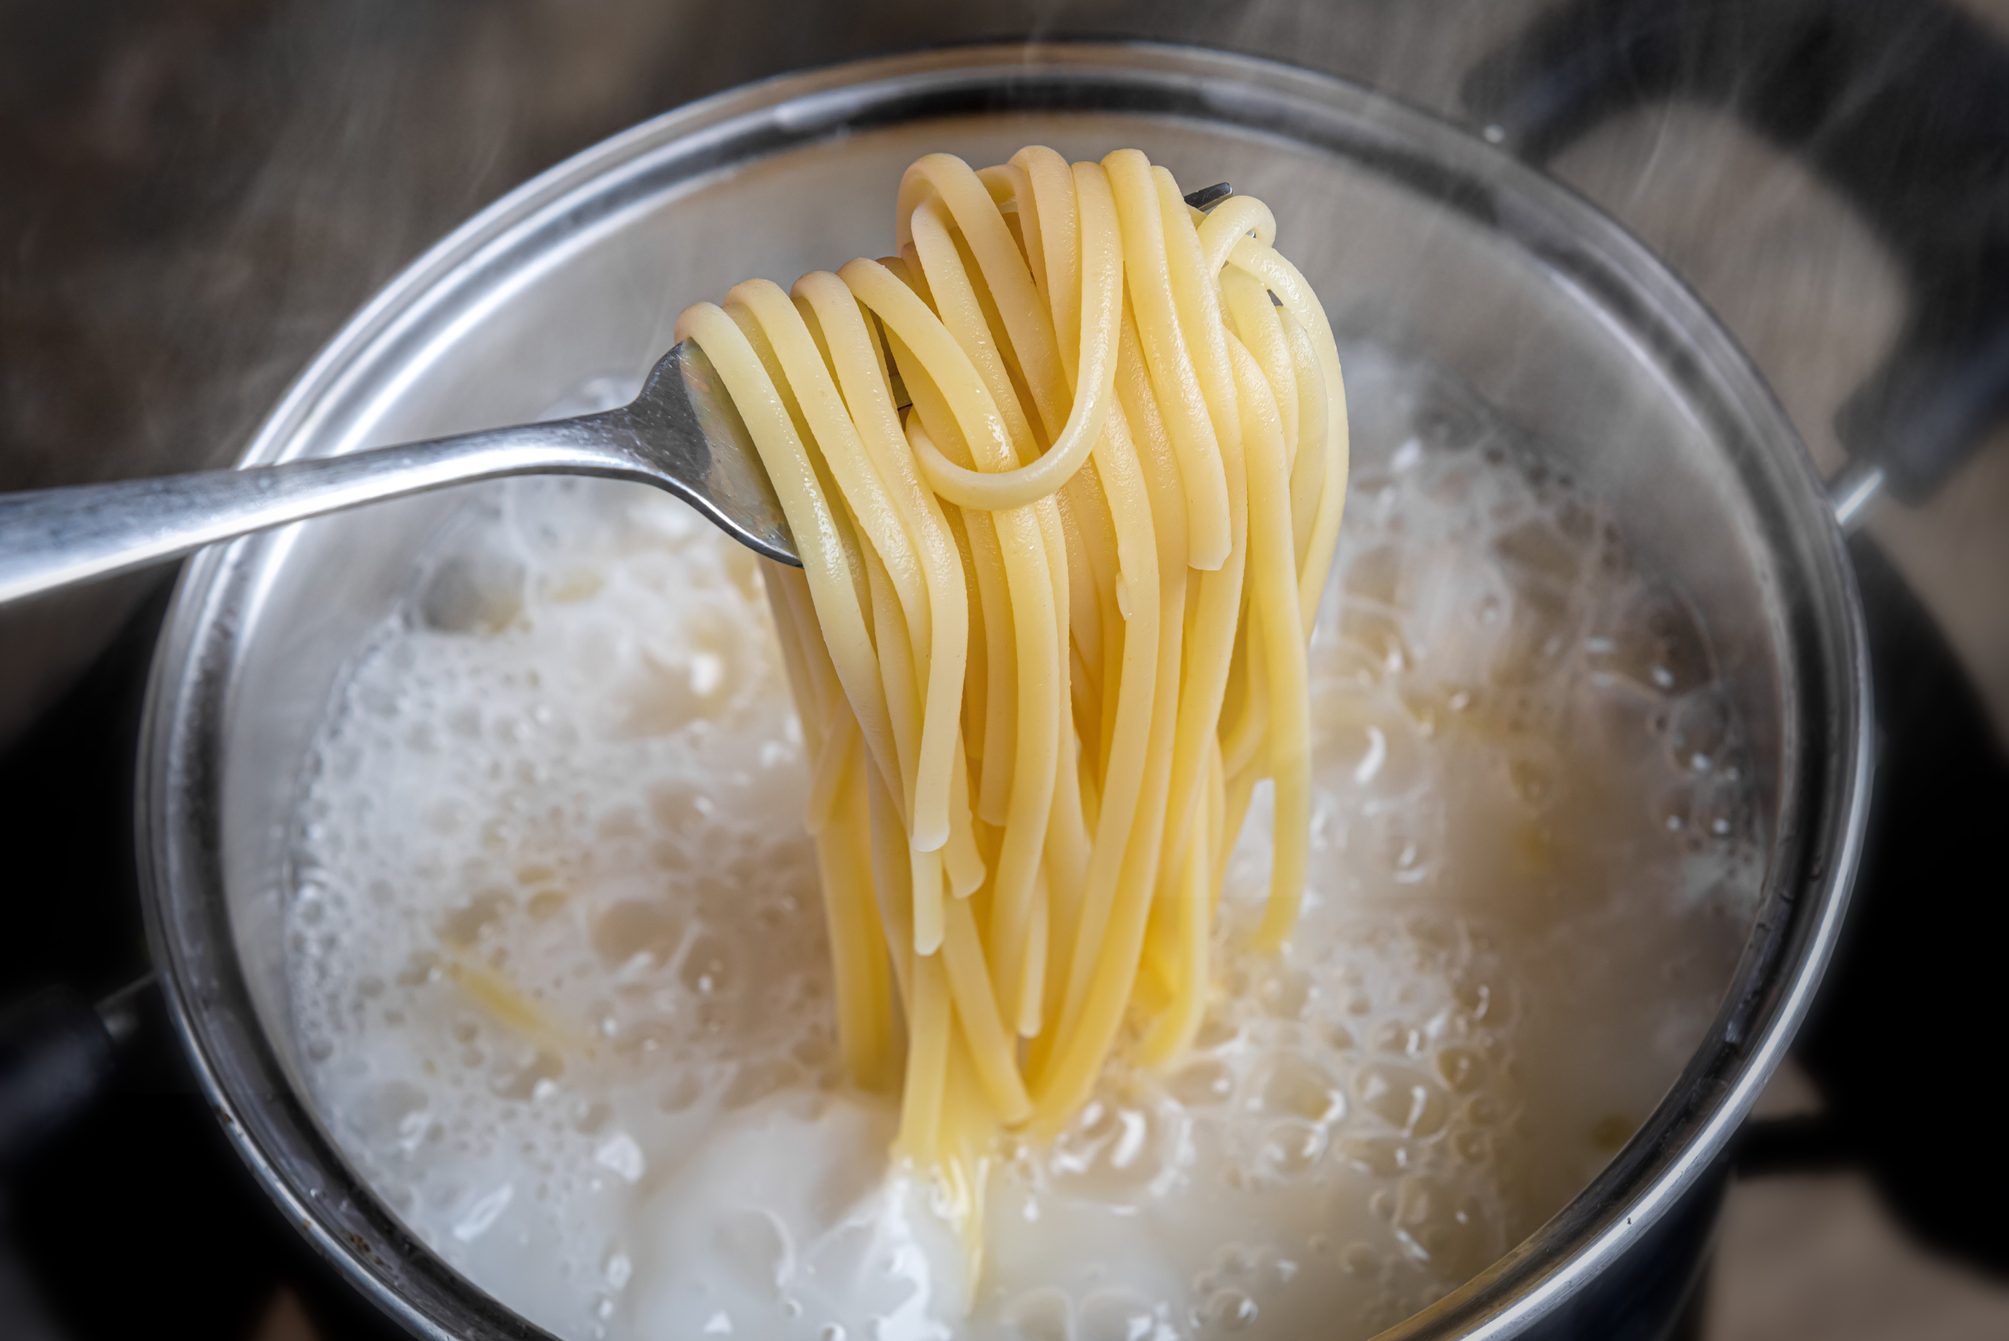 A New Way to Cook Pasta?